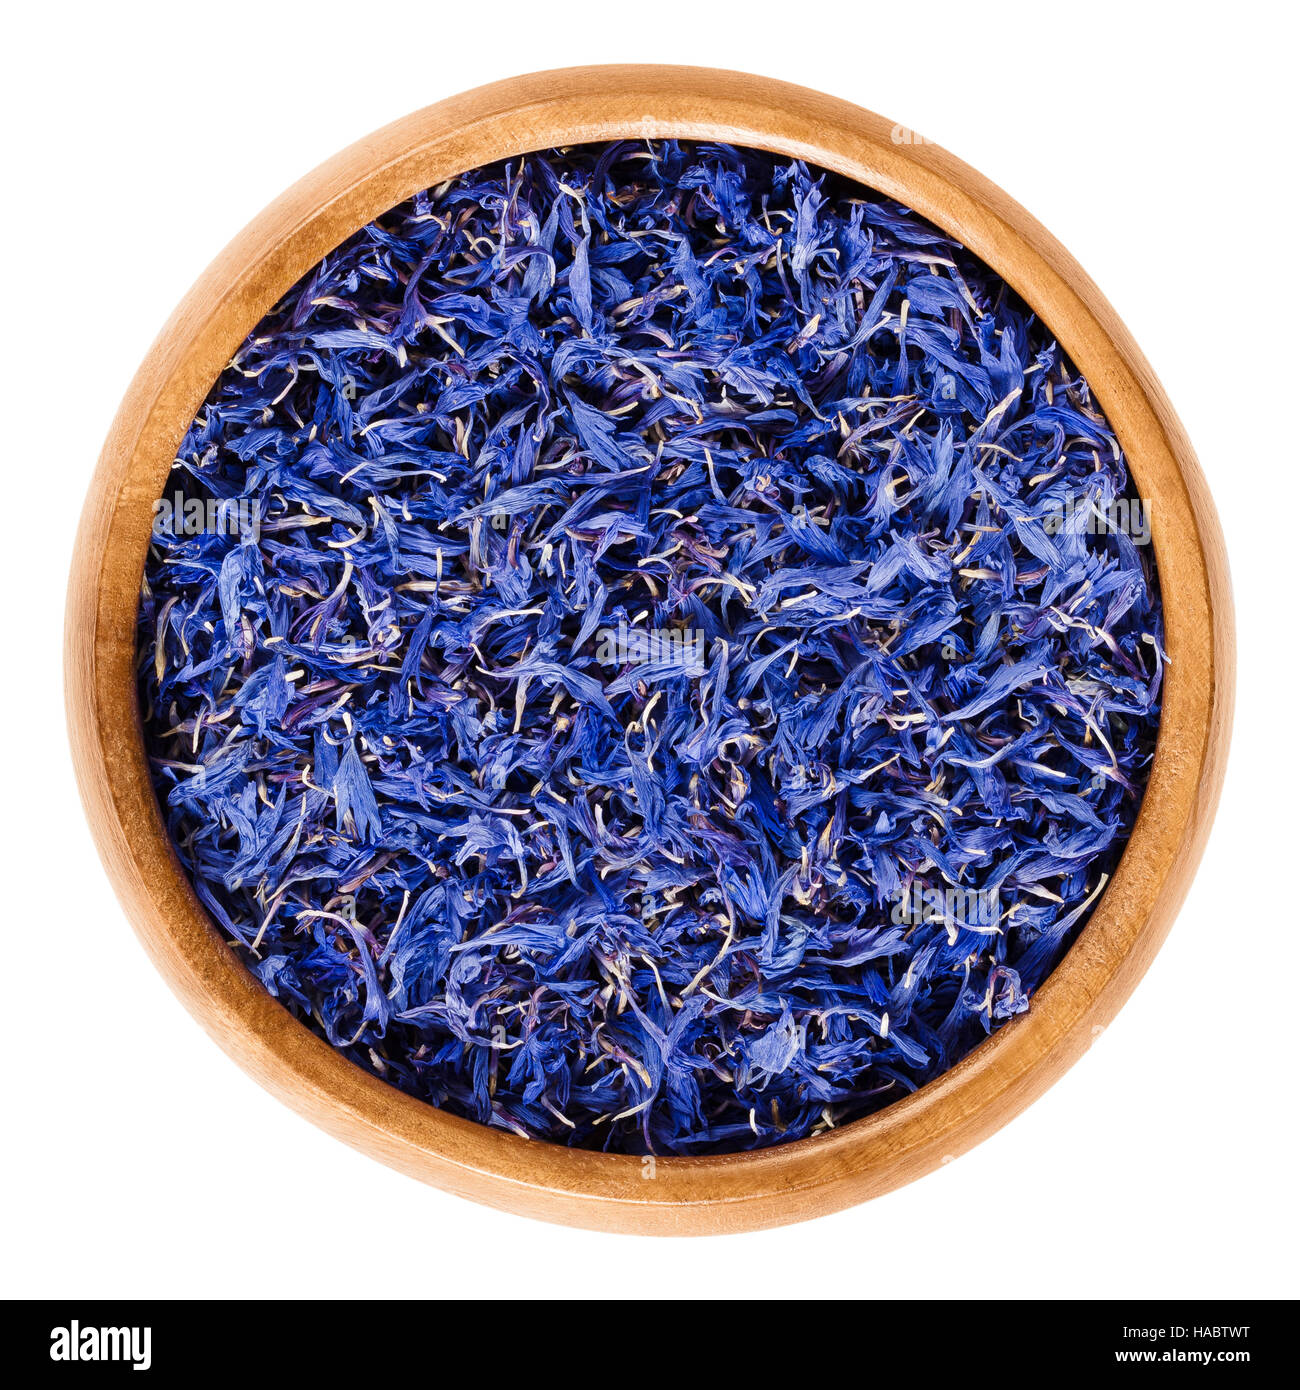 Dried cornflowers in wooden bowl. Edible flowers of Centaurea cyanus with intense blue pigment, used for tea and salads. Stock Photo